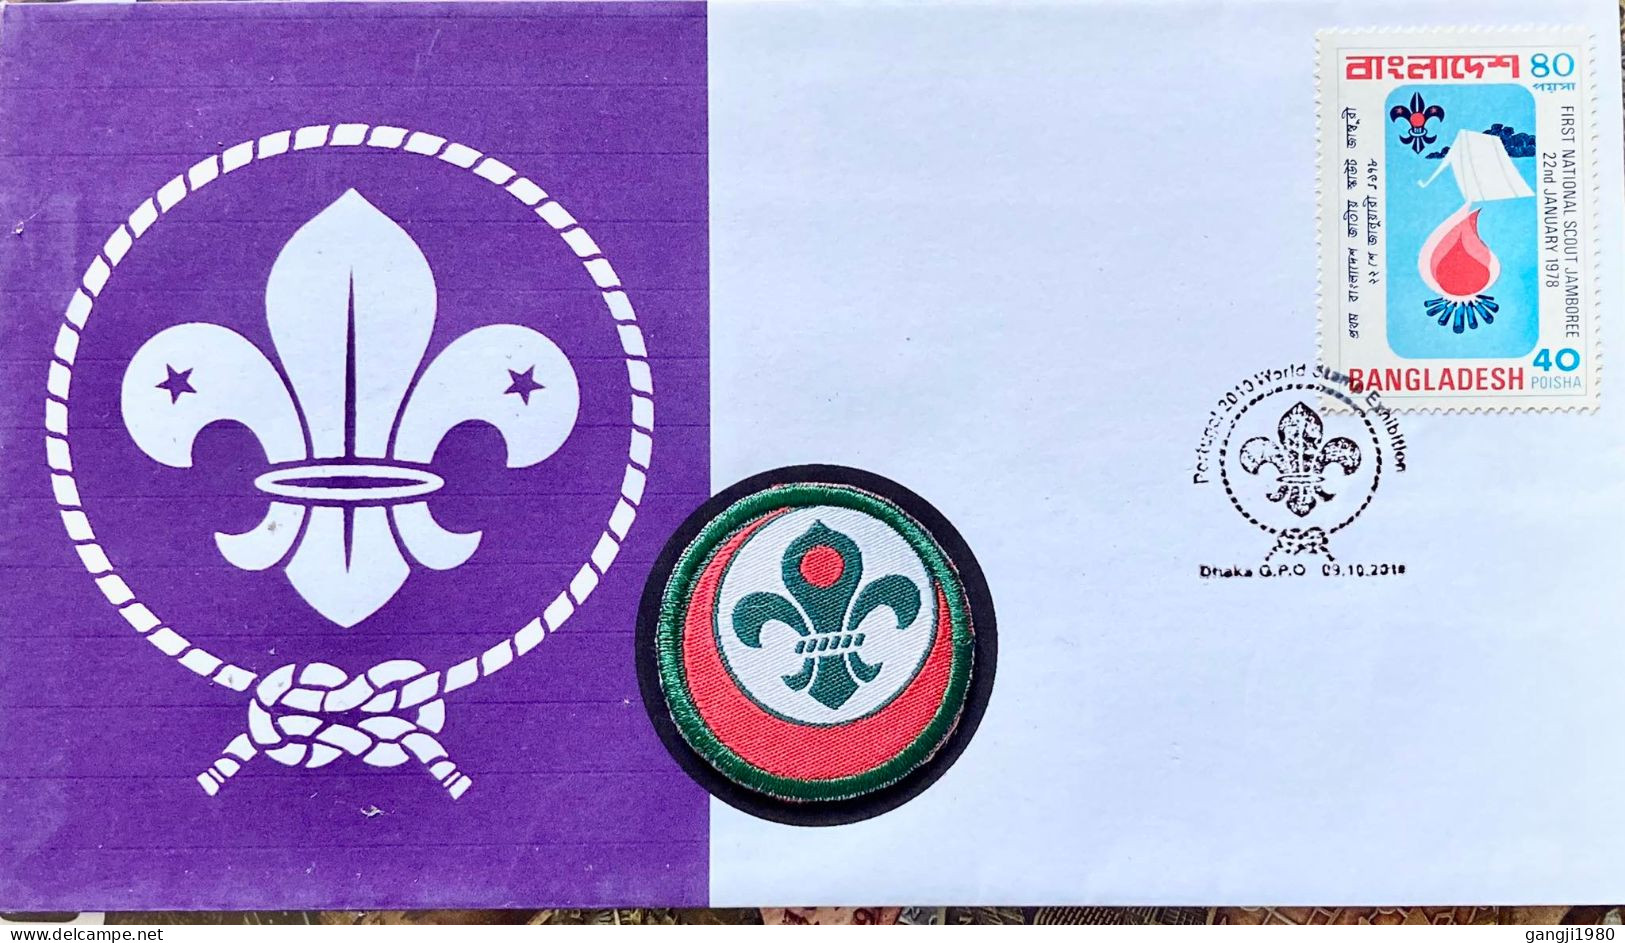 BANGLADESH 2010, PRIVATE COVER SCOUT, HANDMADE CLOTH BADGE, WORLD STAMP EXHIBITION, SCOUT JAMBOREE 1978 STAMP - Bangladesh